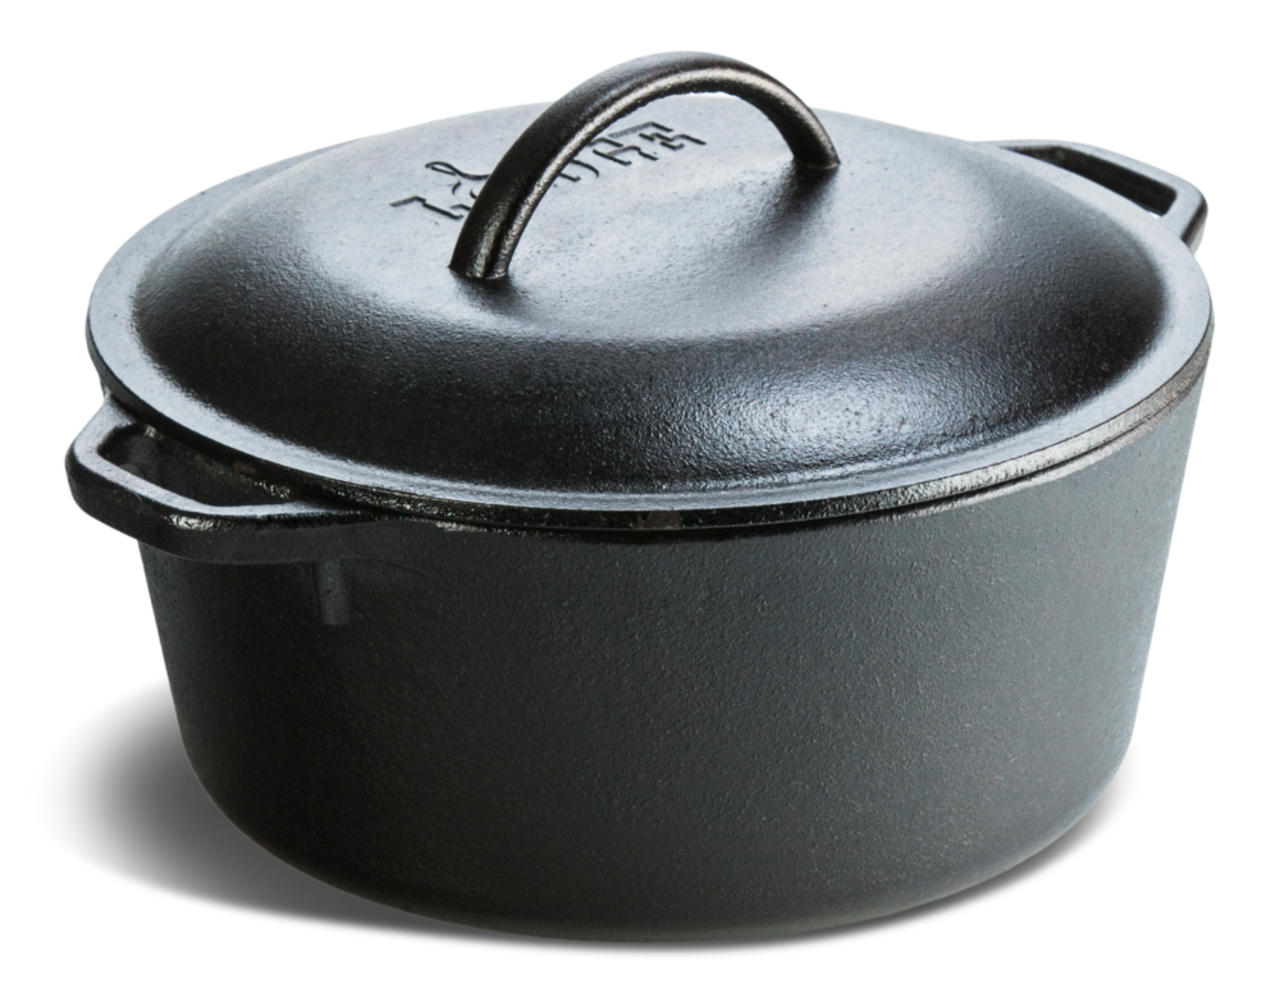 https://media-www.canadiantire.ca/product/living/kitchen/cookware/1427207/cast-iron-5-quartz-dutch-oven-31d368f9-cef4-4cb3-8f77-57ad2ff87e4c.png?imdensity=1&imwidth=640&impolicy=mZoom